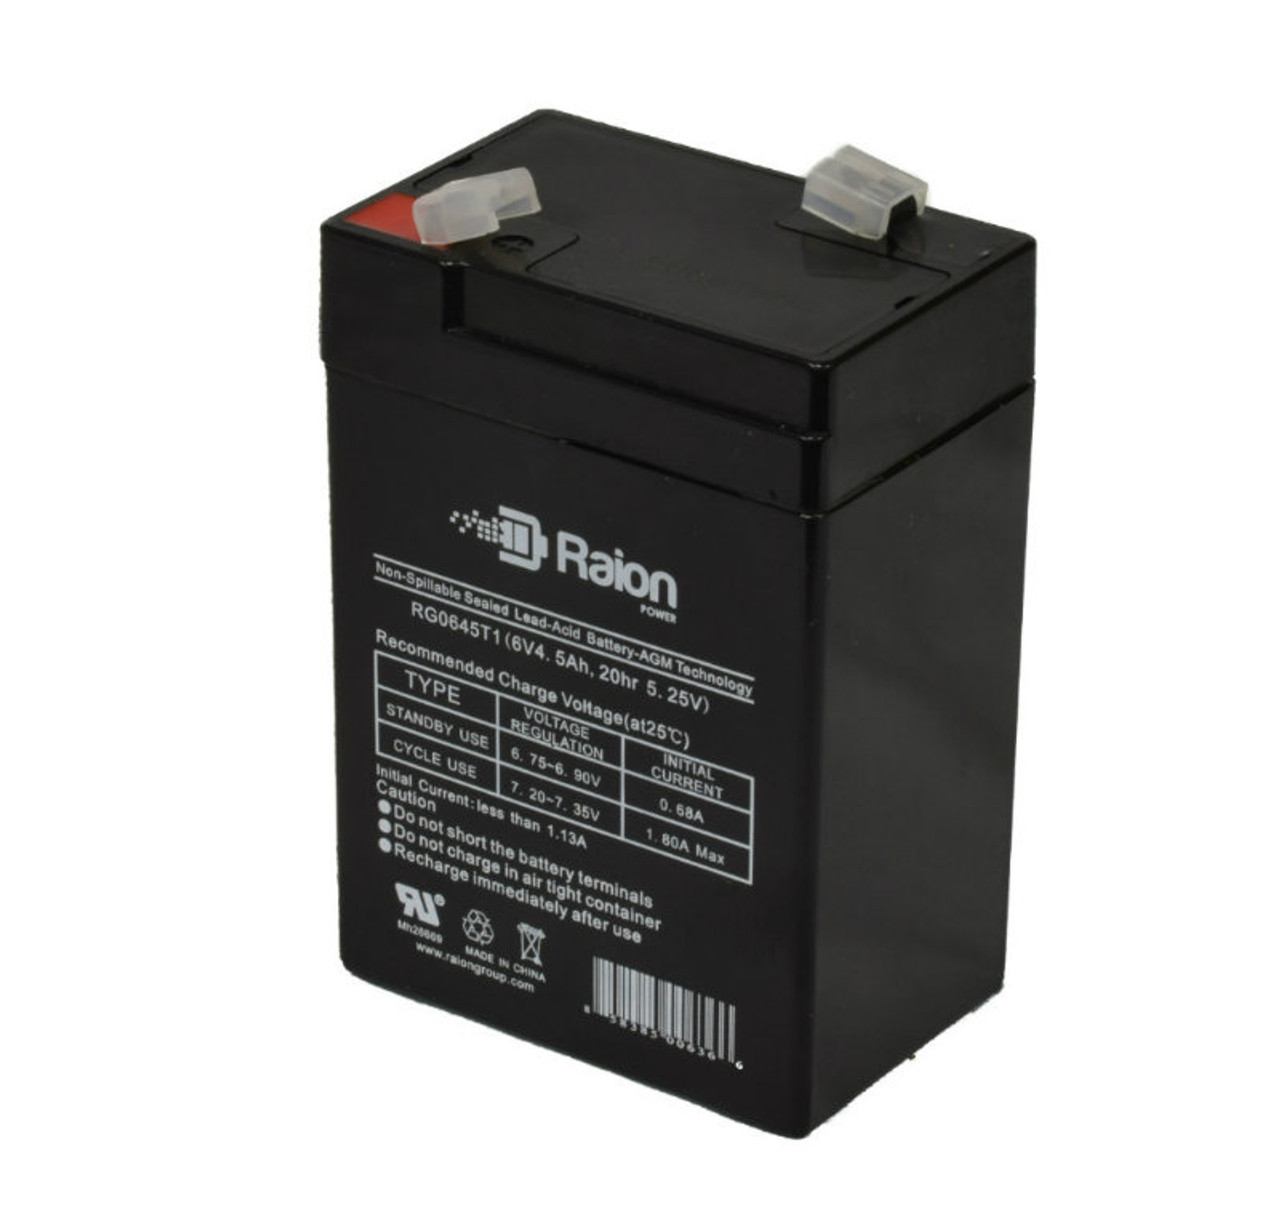 Raion Power RG0645T1 6V 4.5Ah Replacement Battery Cartridge for Kalee KL400376